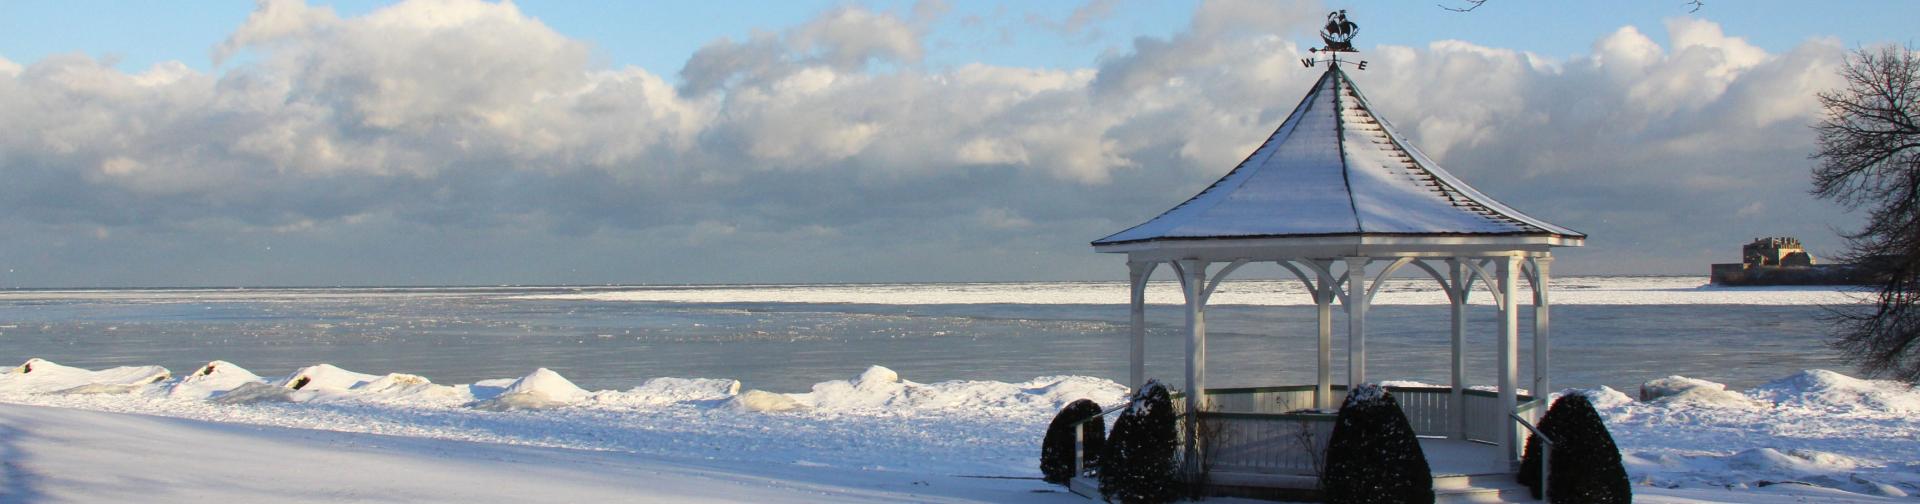 Photo of Queens Royal Park Gazebo after a snow fall - Photo Courtesy of Tony Chisholm